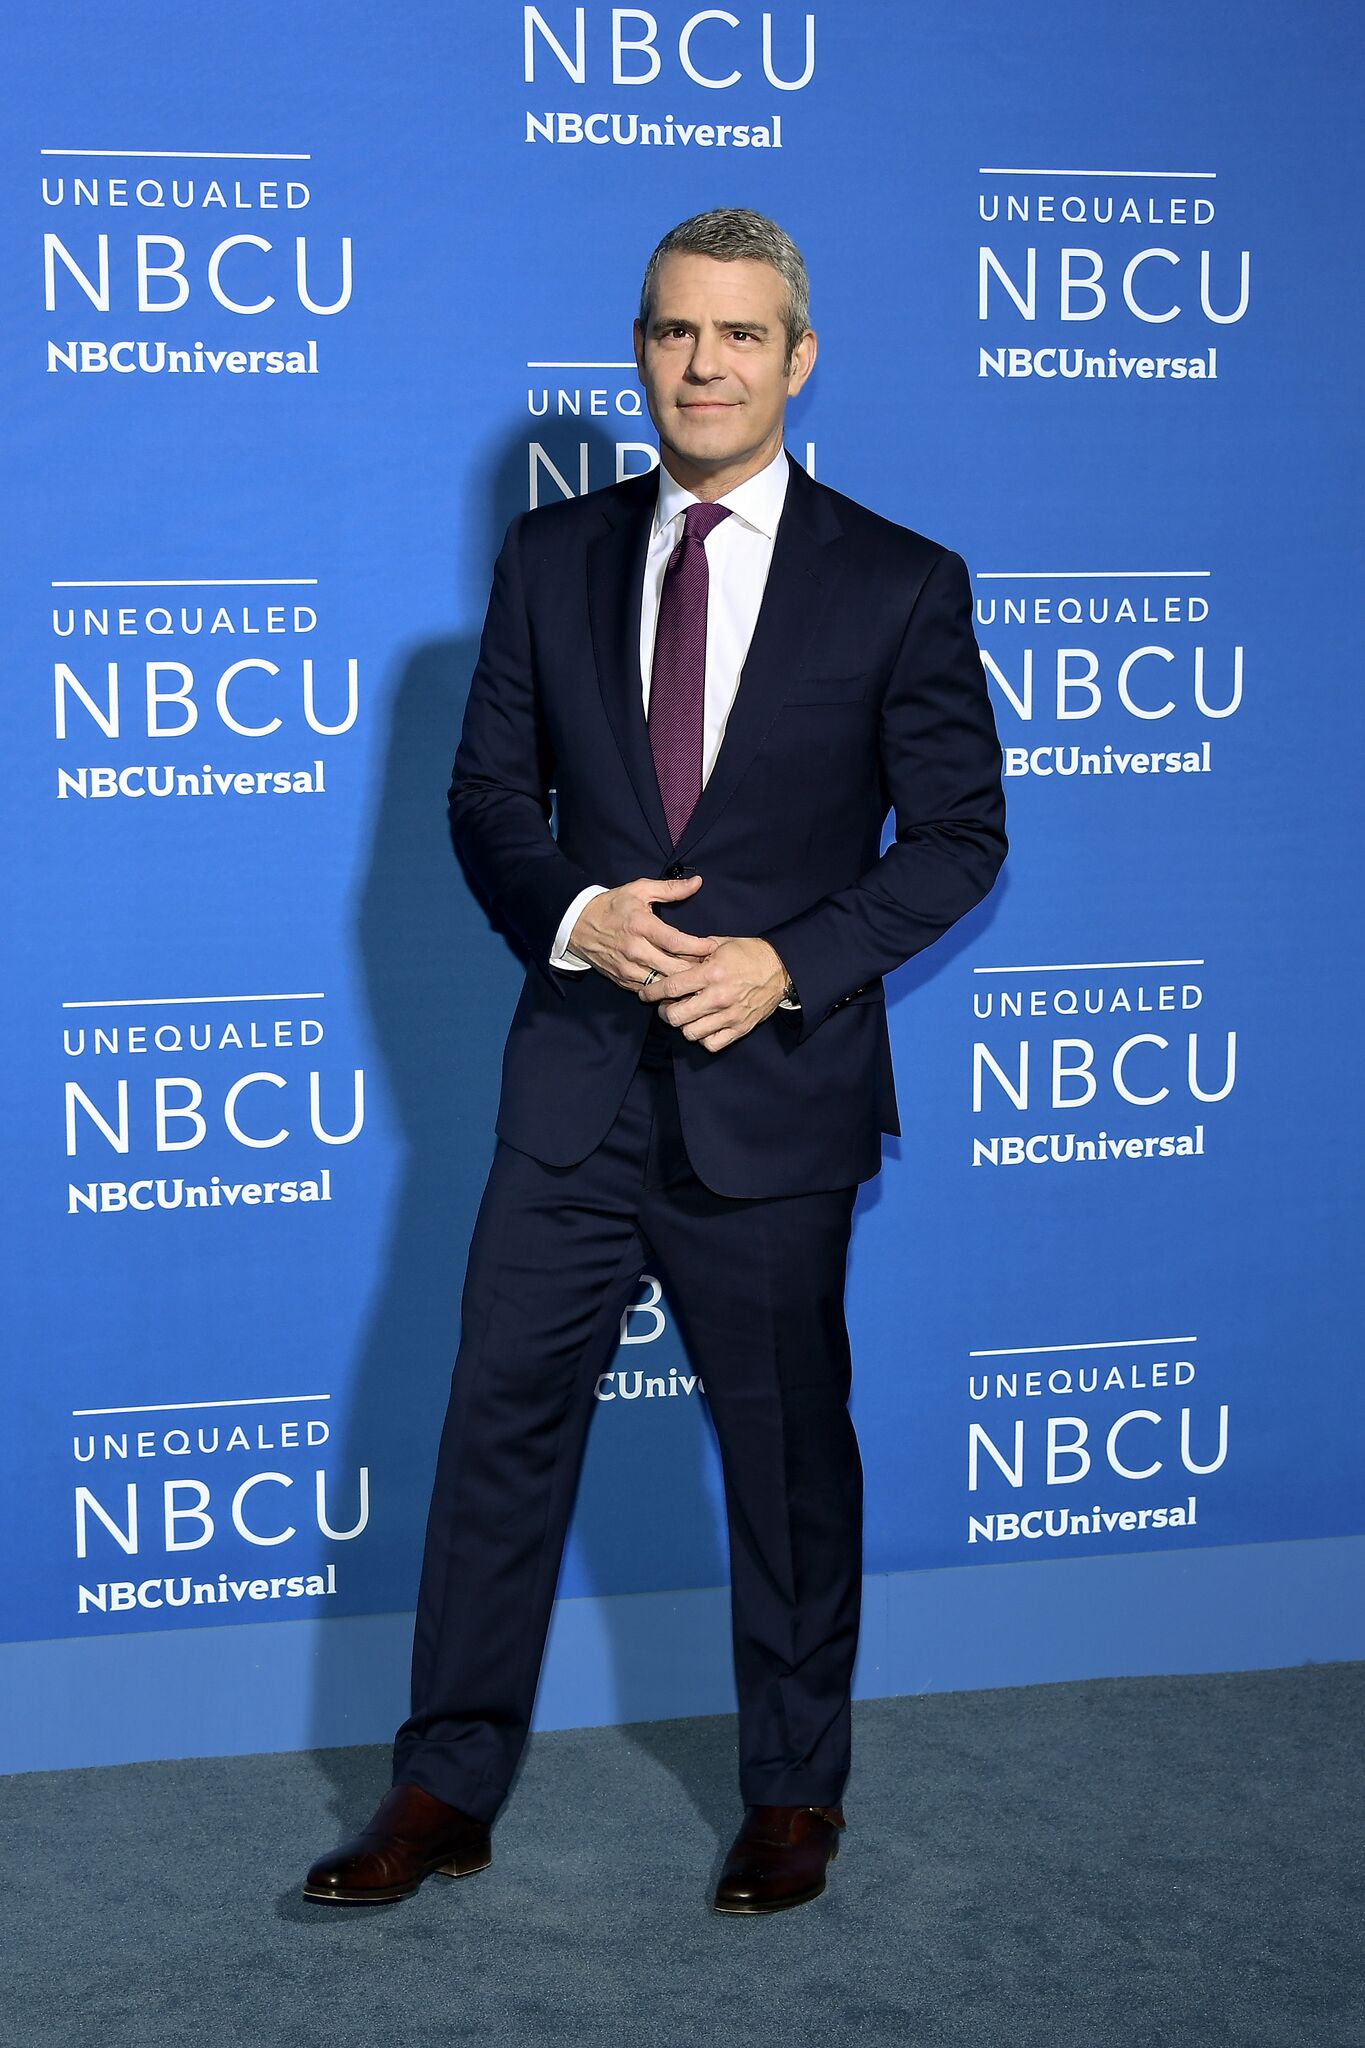 Andy Cohen posing for picture at NBCU event | Getty Images